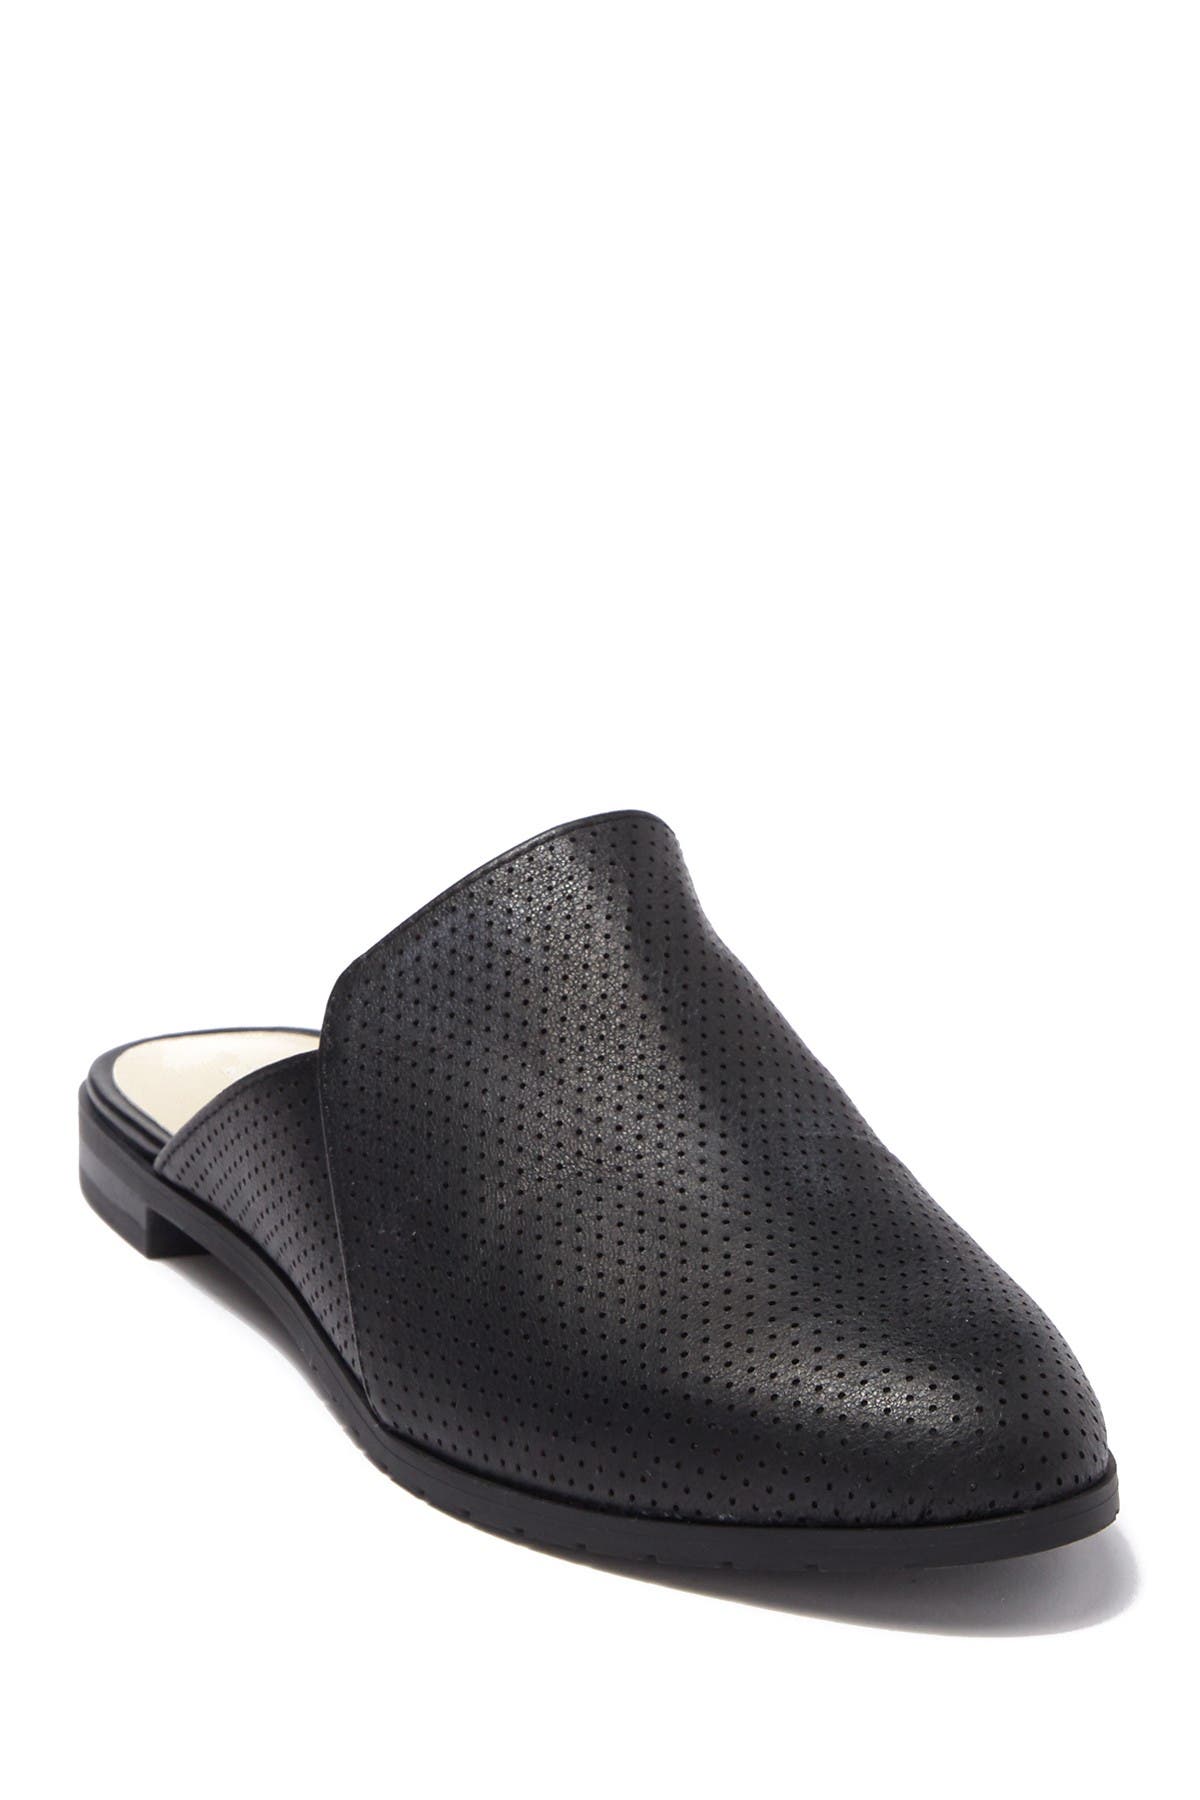 kenneth cole reaction mules